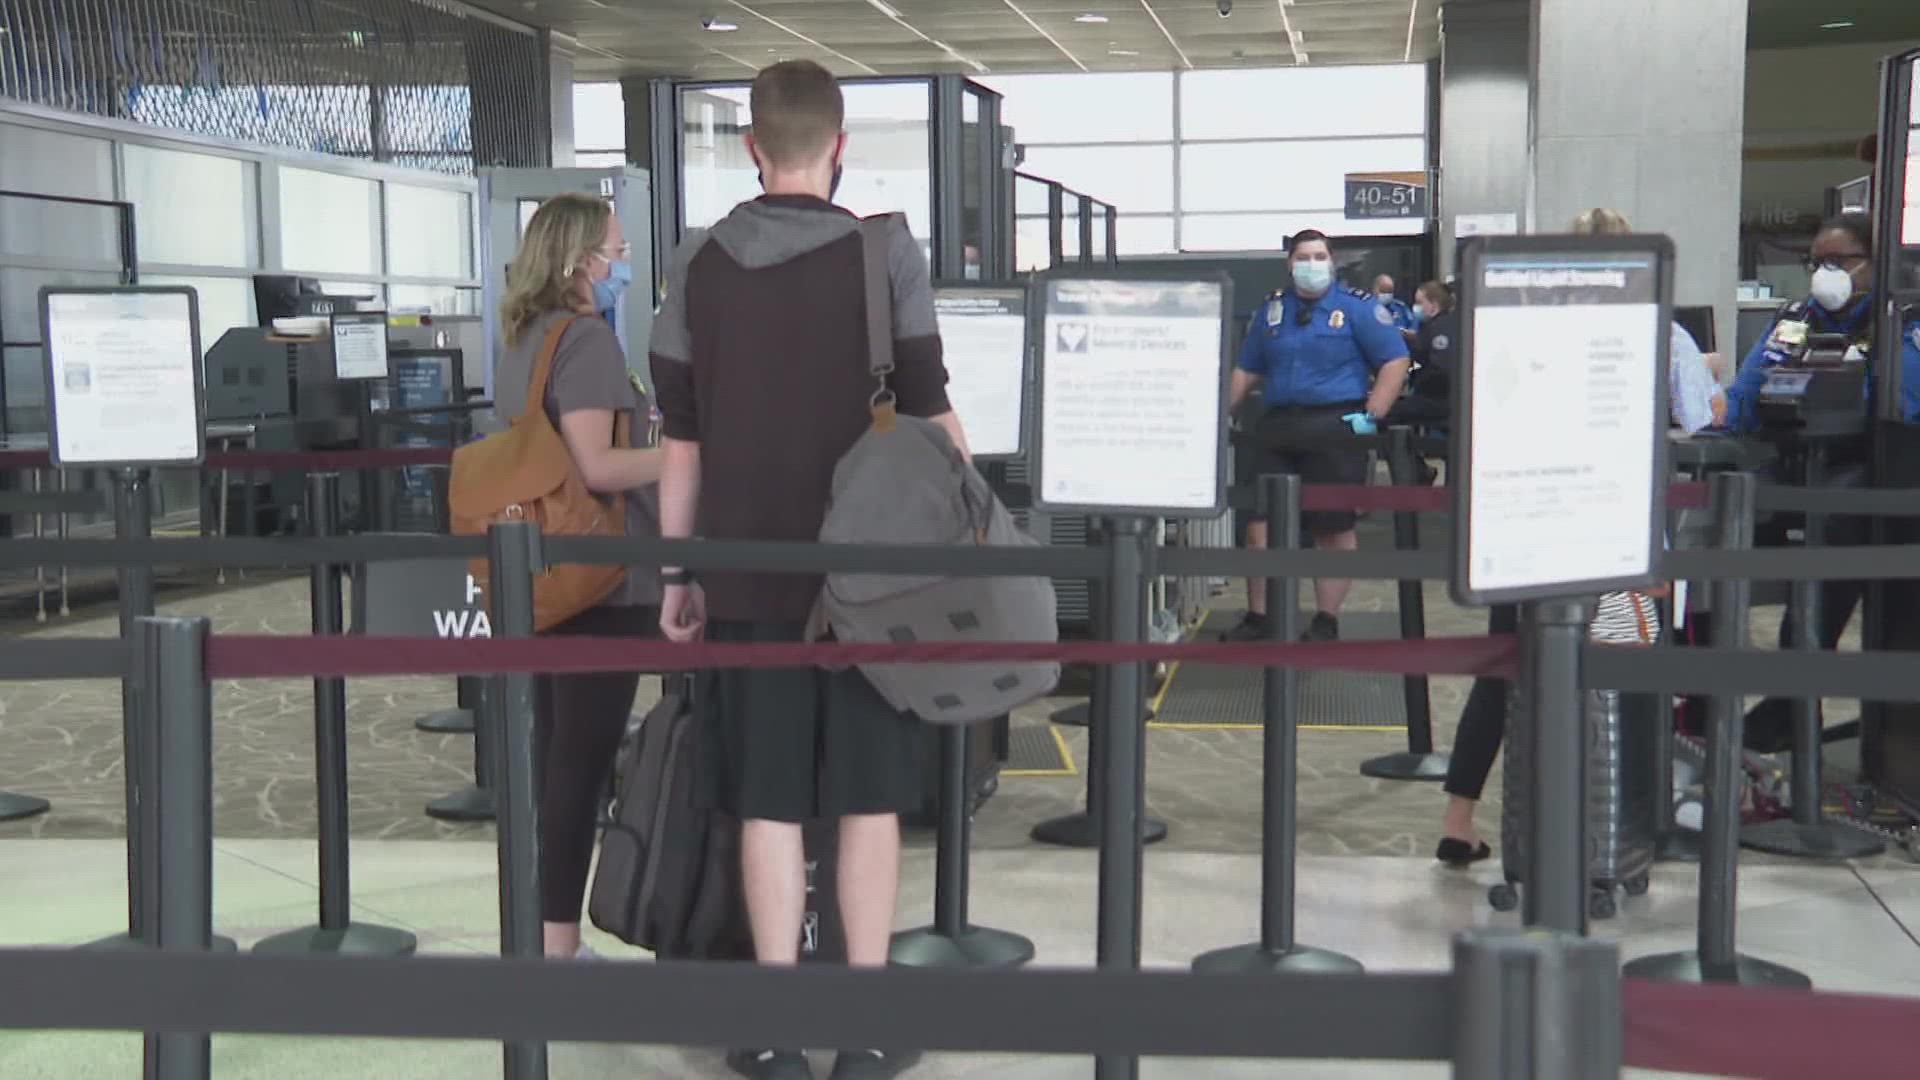 TSA agents found 15 guns on travelers at PTI Airport in 2022.